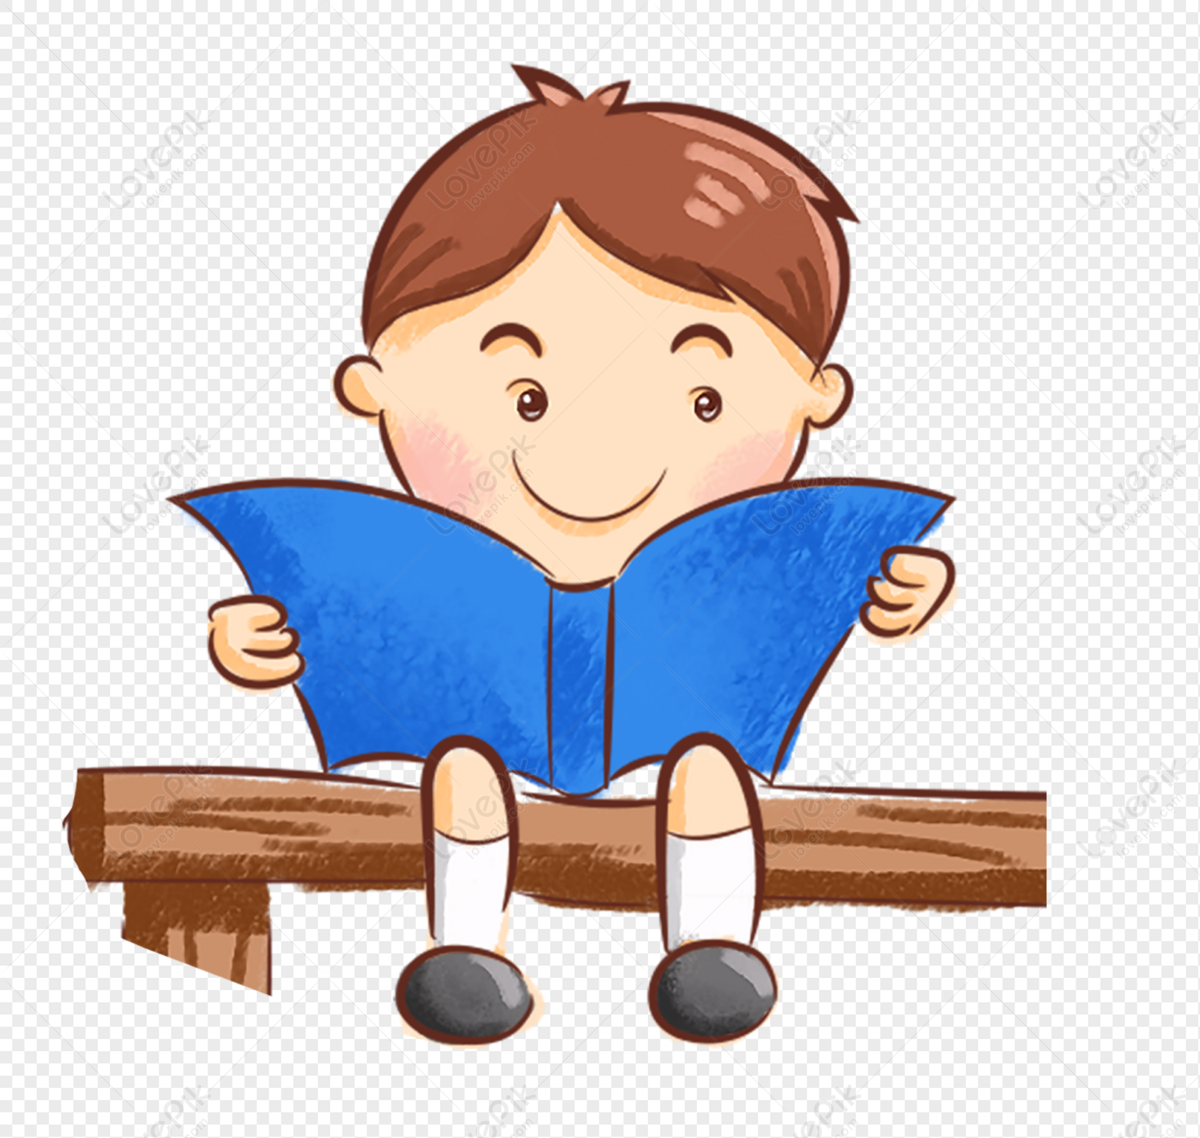 Children Reading Books PNG Free Download And Clipart Image For Free  Download - Lovepik | 400256573